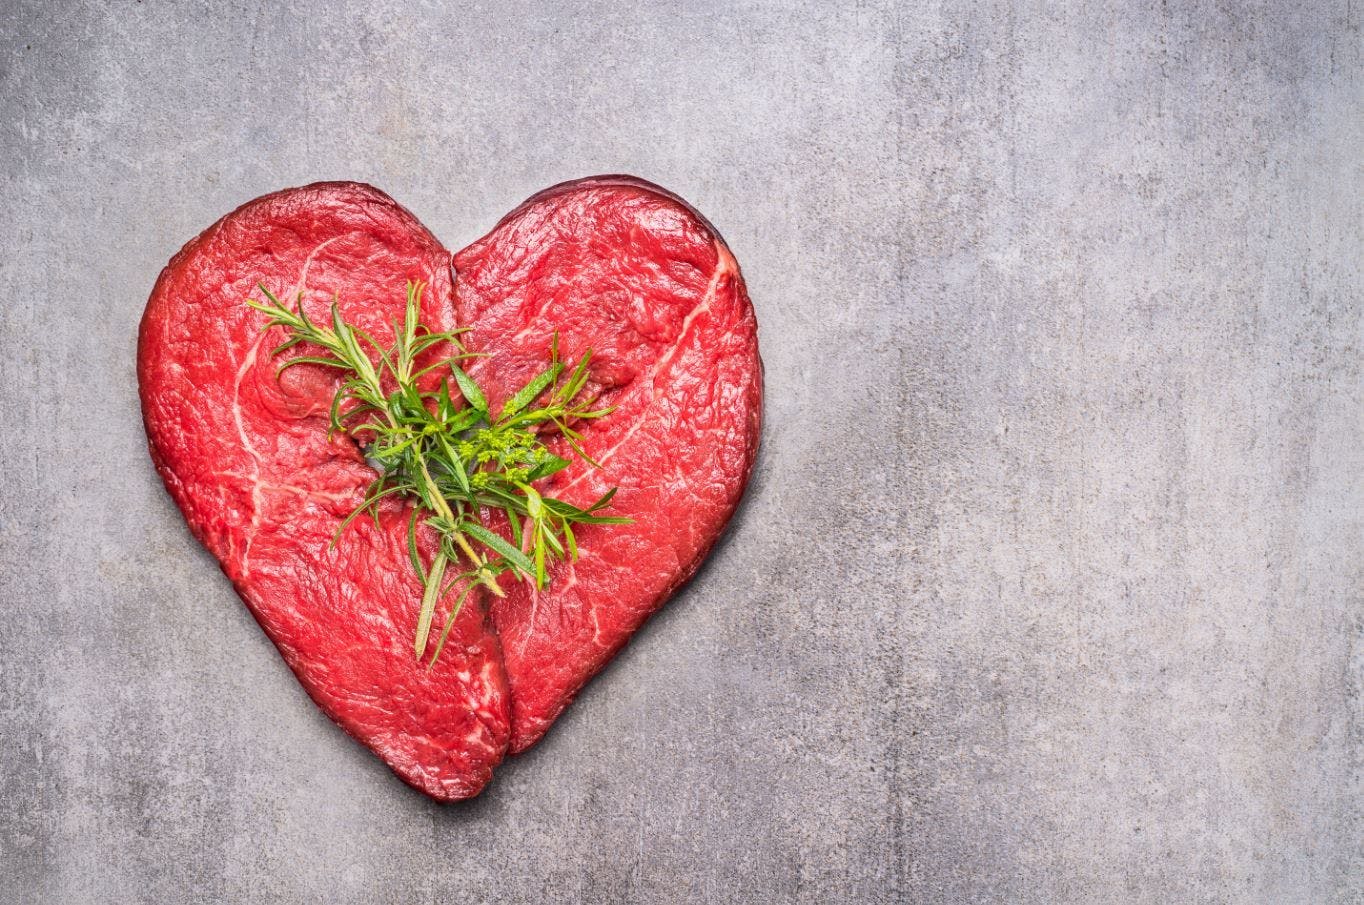 red meat, cardiovascular disease 